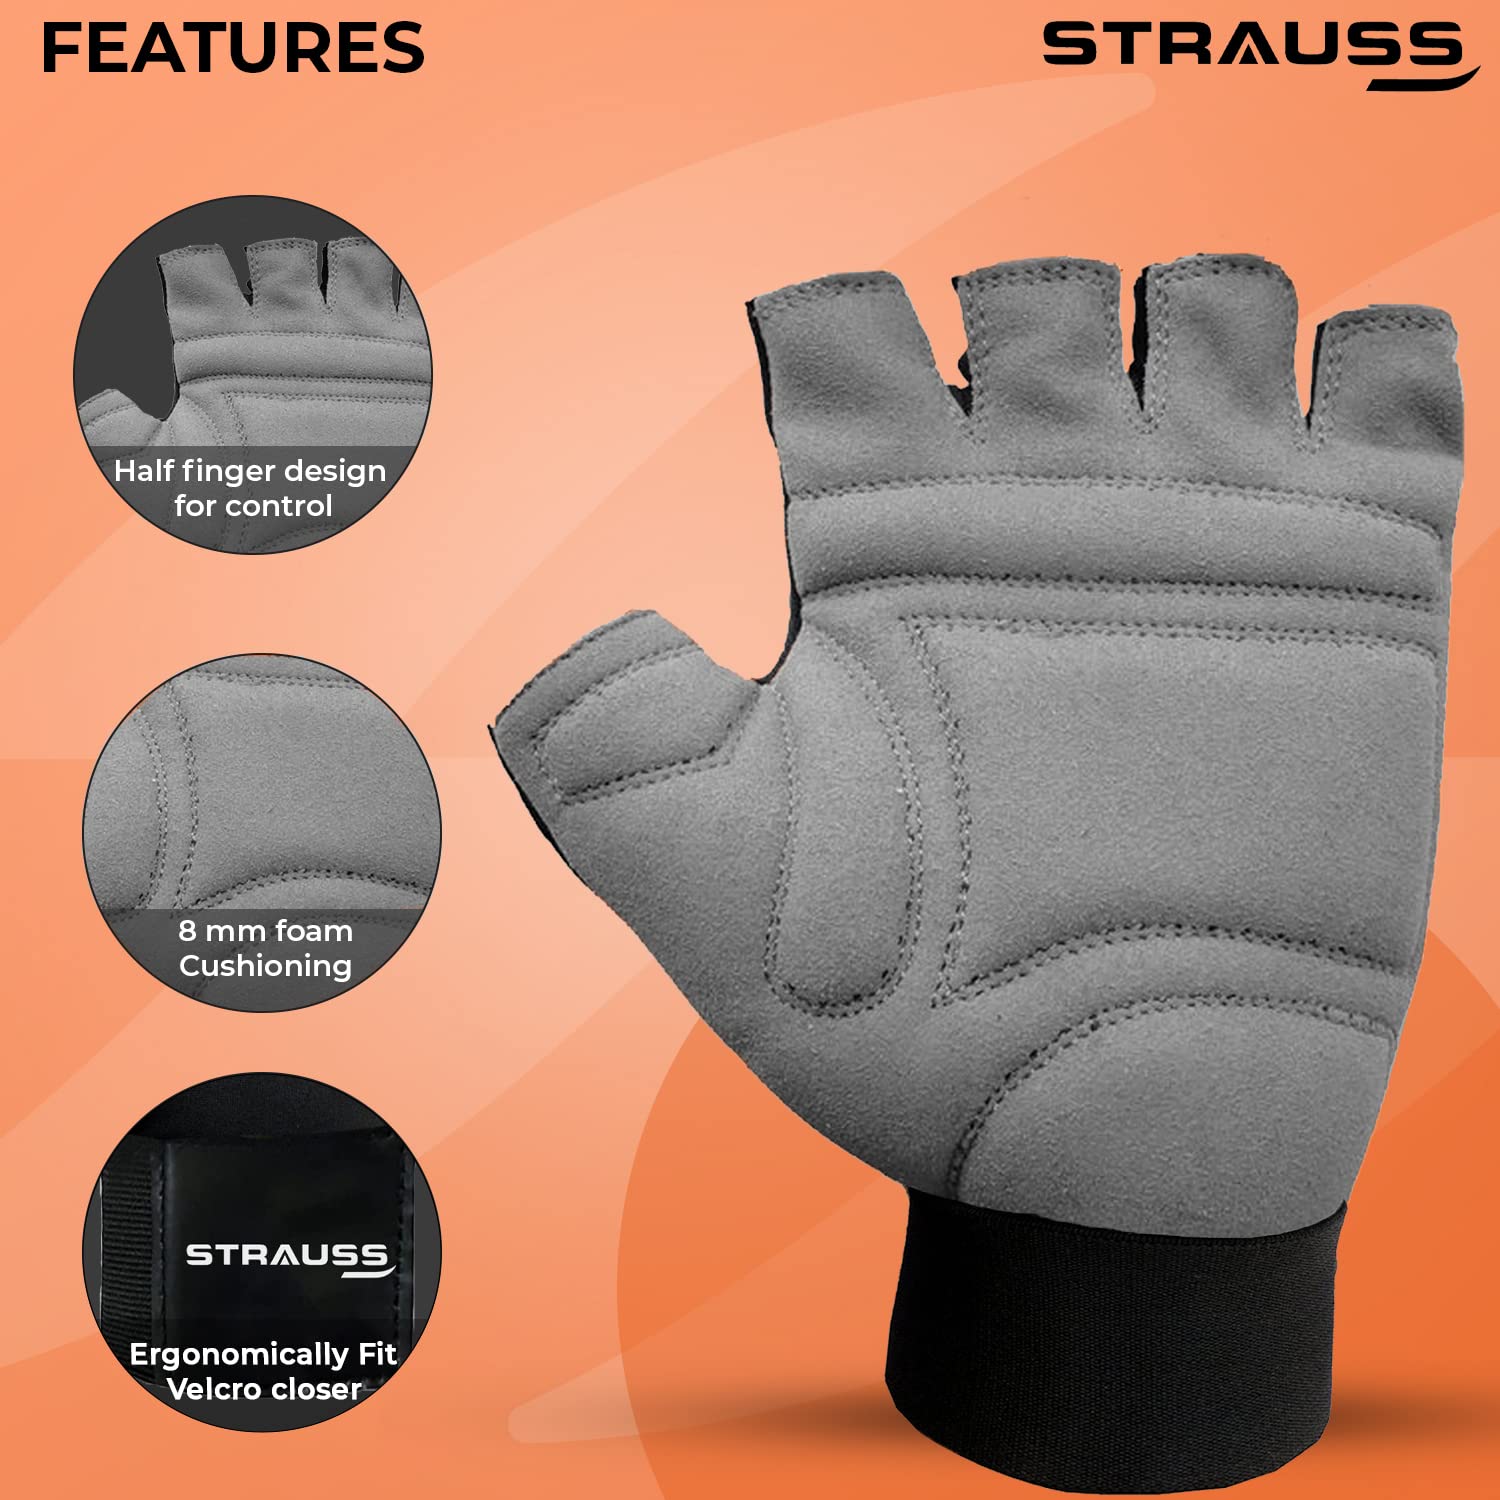 STRAUSS Suede Gym Gloves for Weightlifting, Training, Cycling, Exercise & Gym | Half Finger Design, 8mm Foam Cushioning, Anti-Slip & Breathable Lycra Material, (Grey/Black), (Medium)